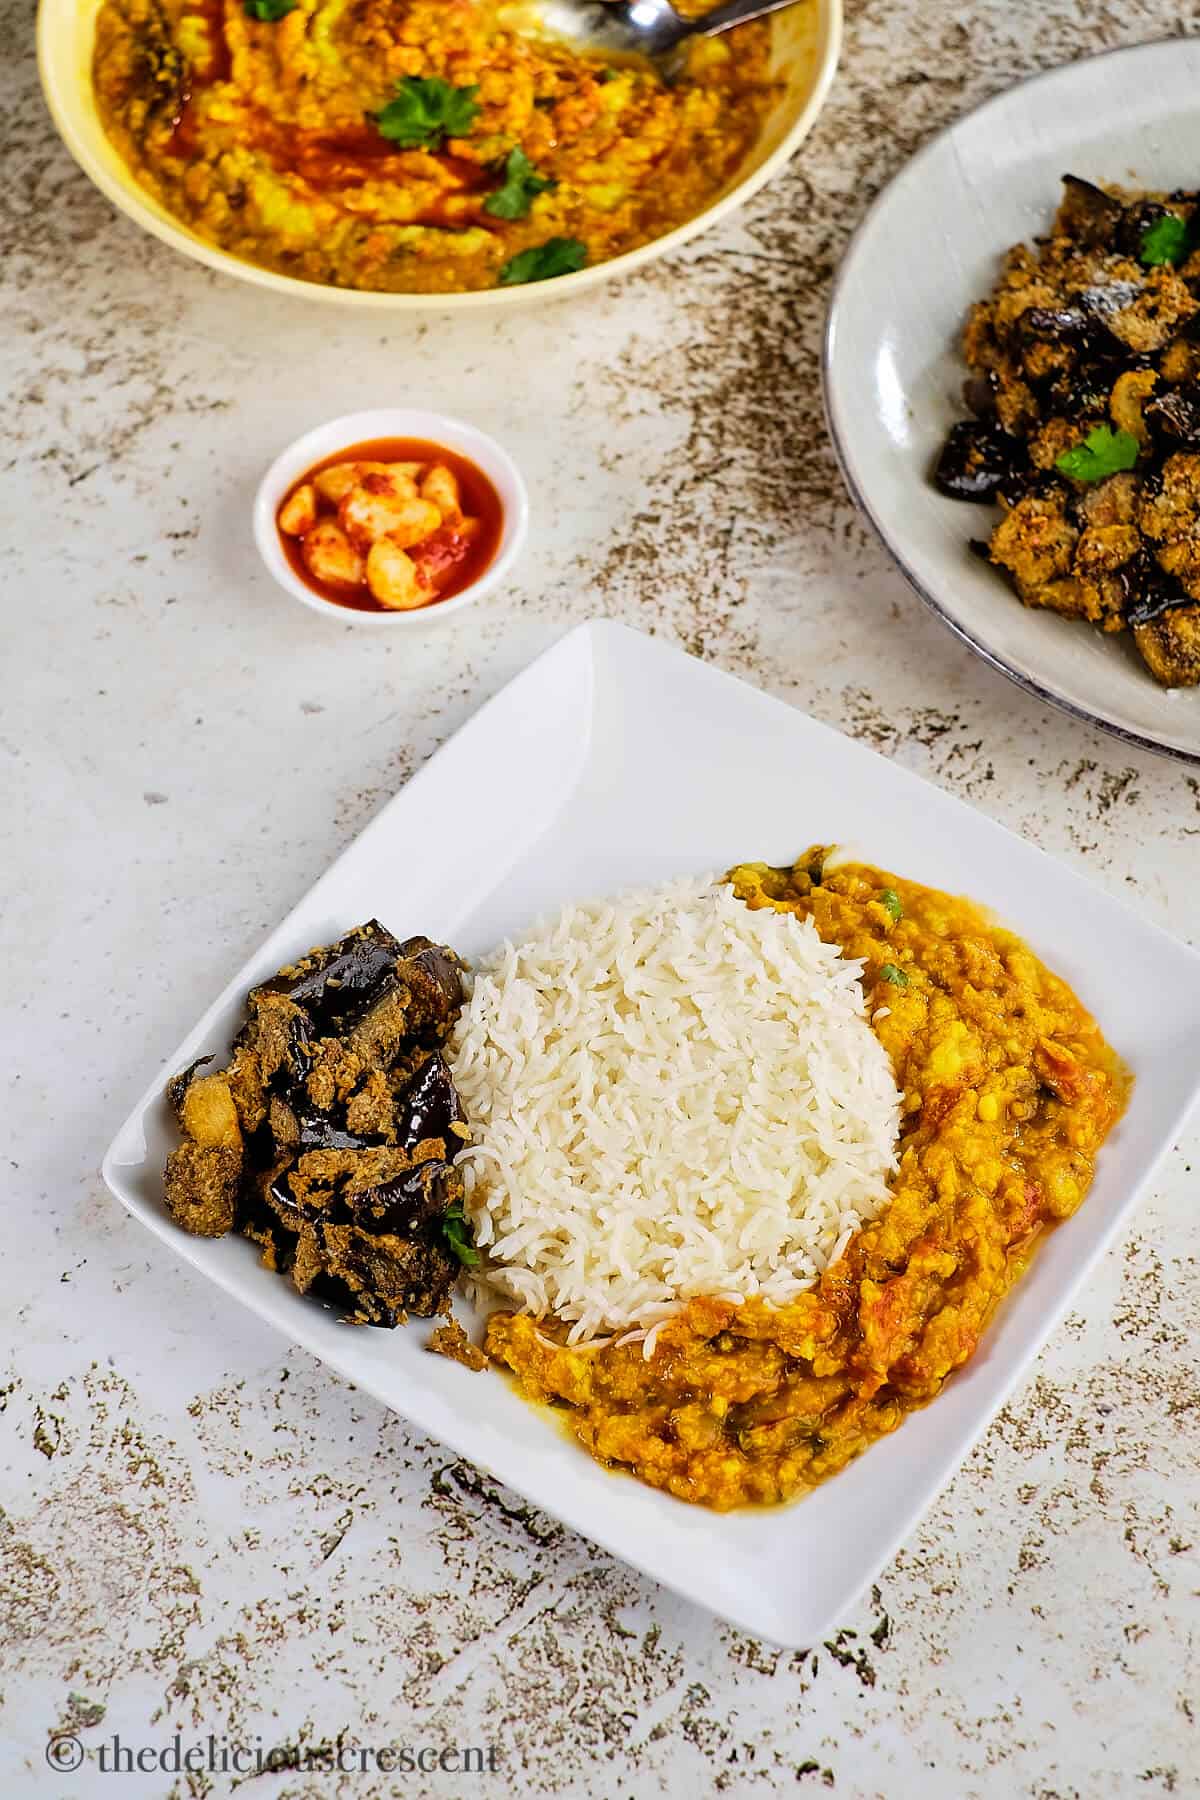 Spicy roasted eggplant served with rice and dal.